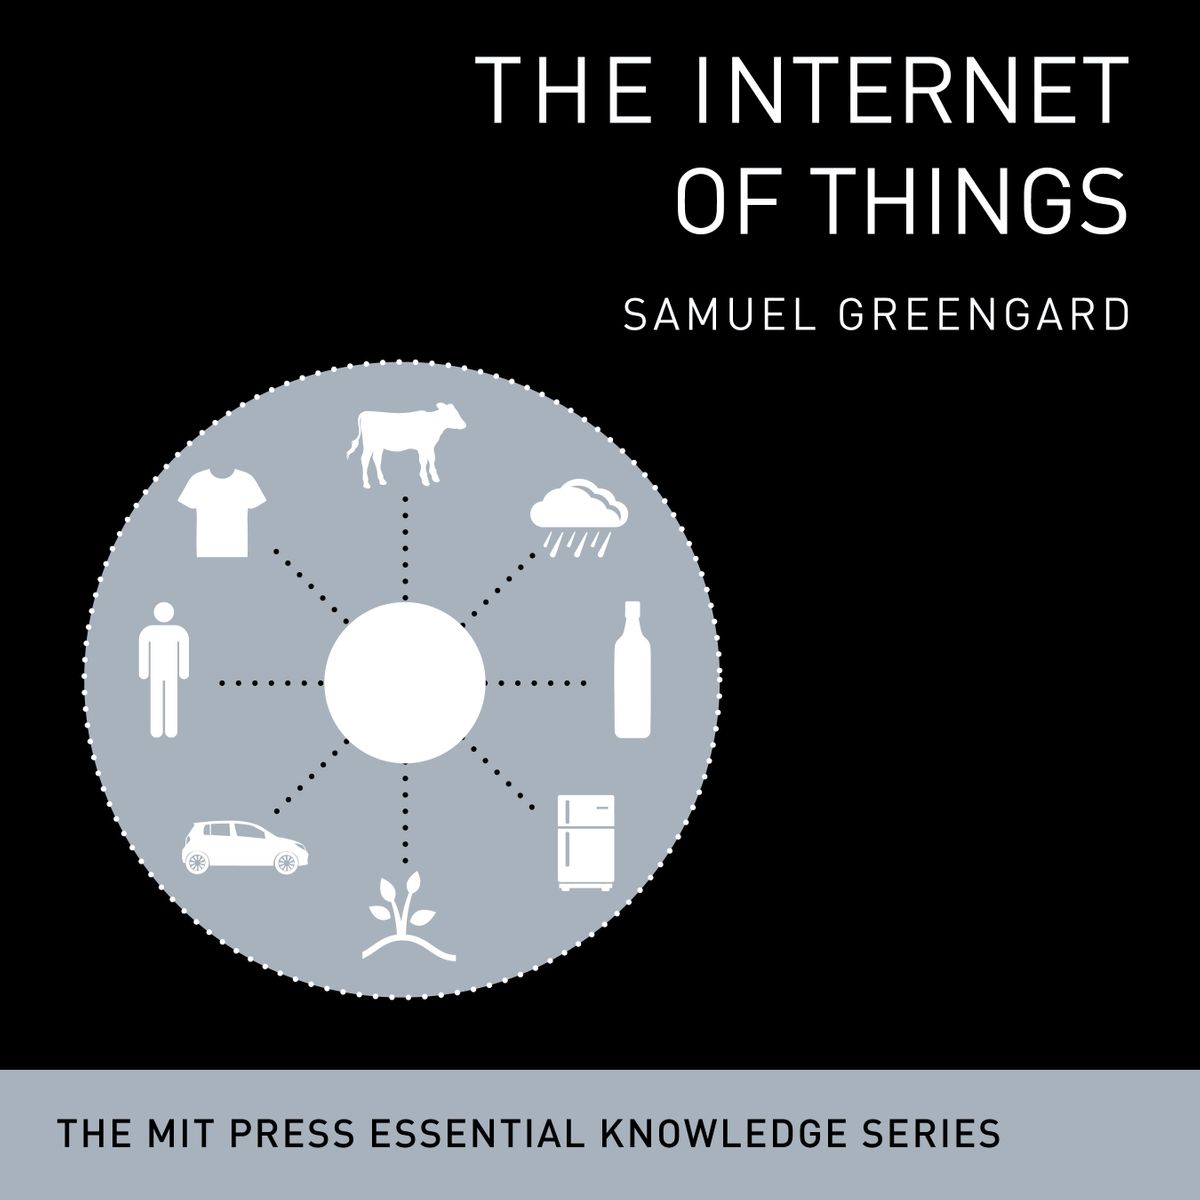 Virtual reality. Samuel GREENGARD. The Internet of things. Revised and updated Edition. Samuel GREENGARD. Mit press